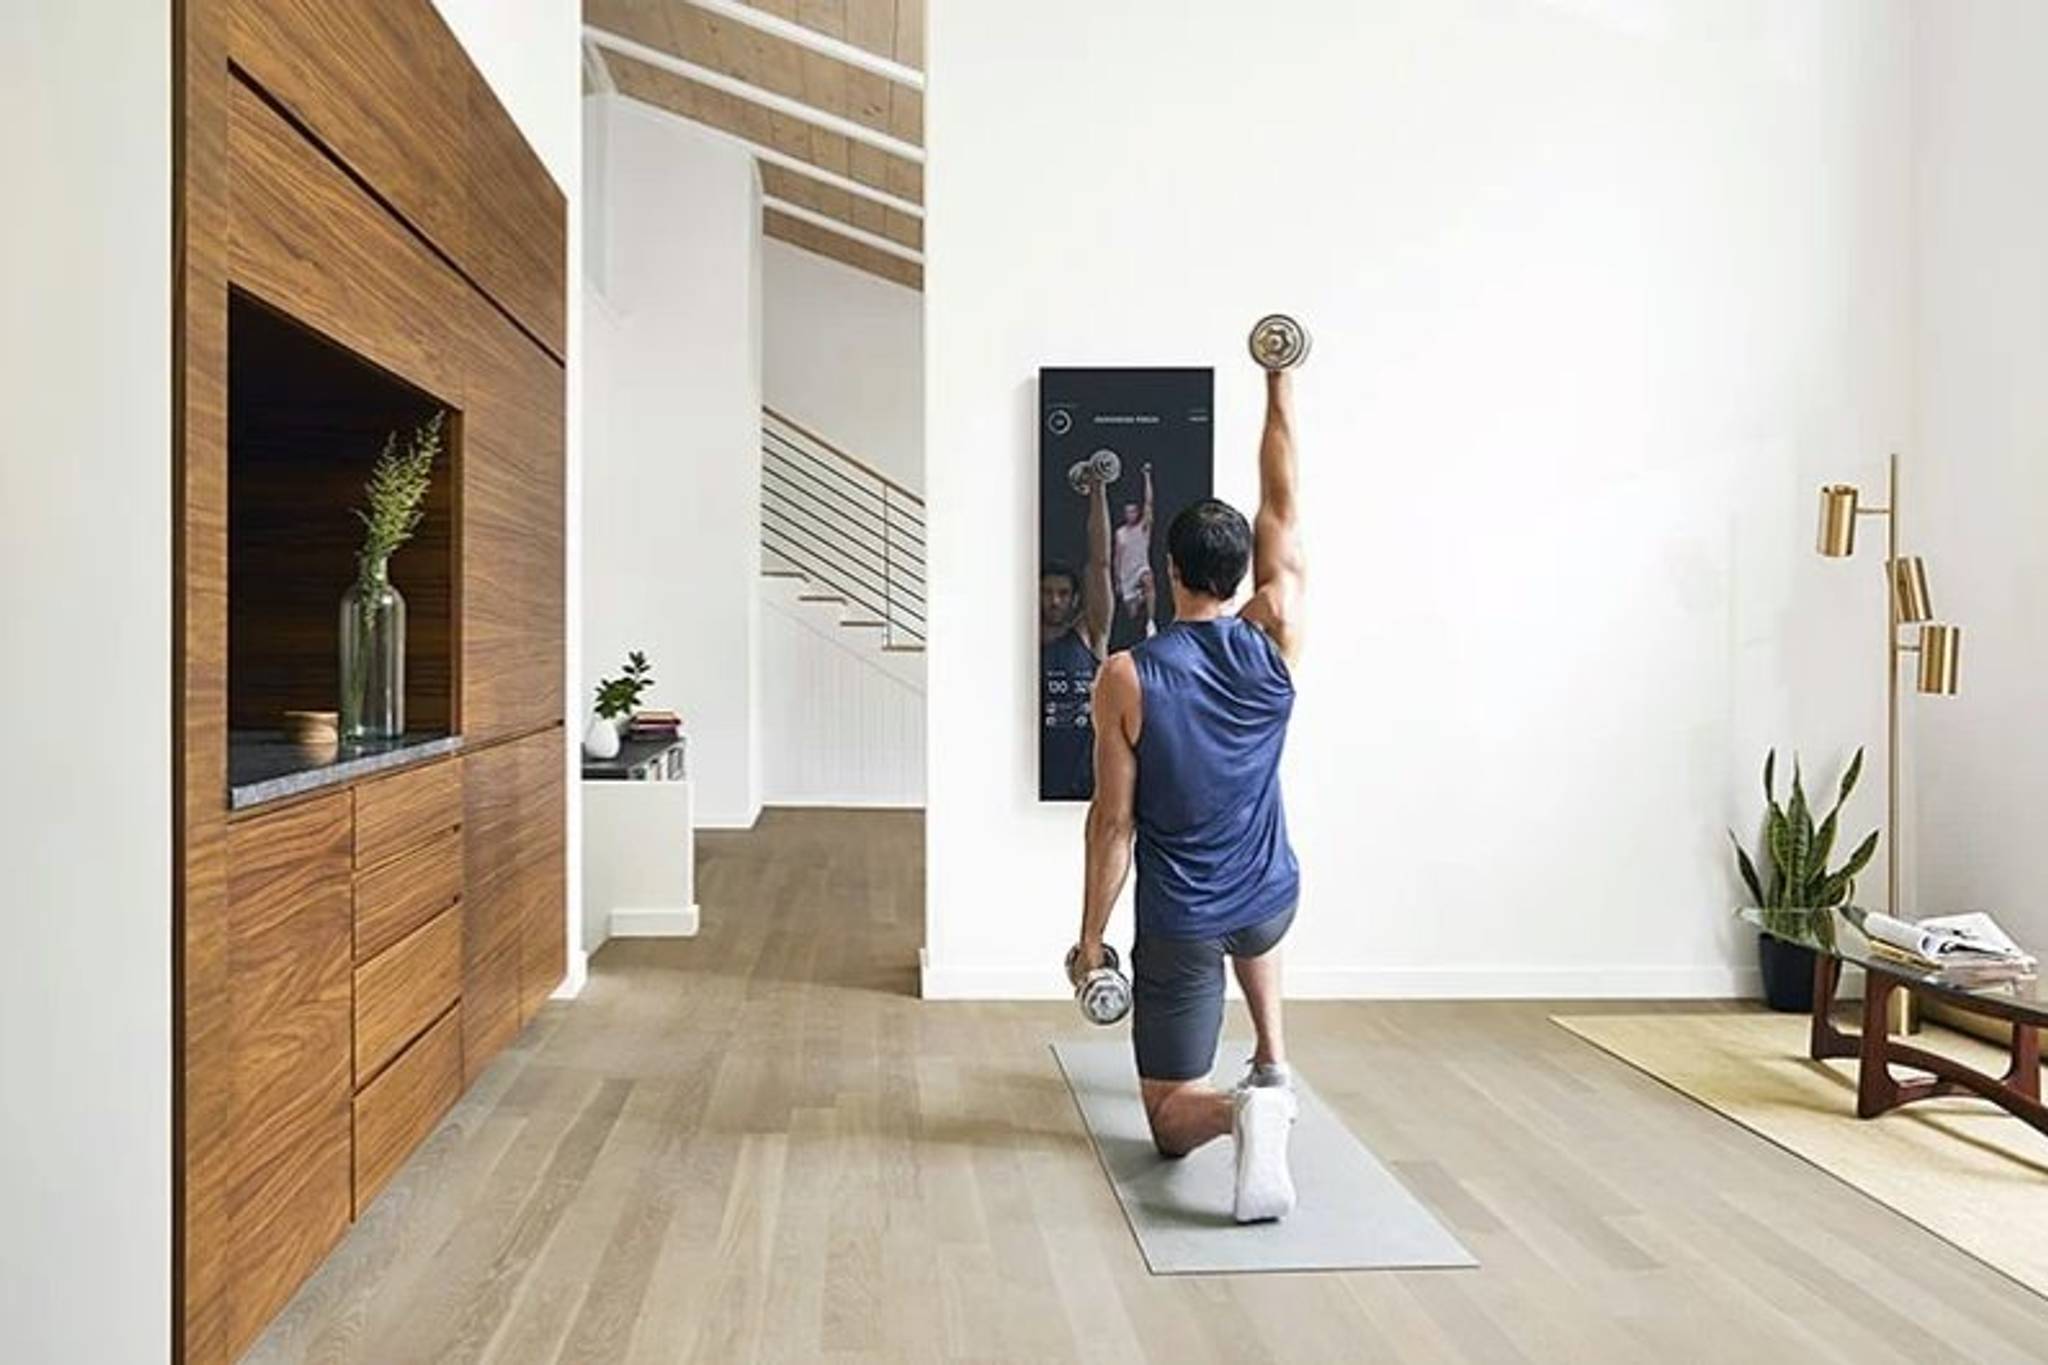 Mirror reflects growing interest in at-home fitness